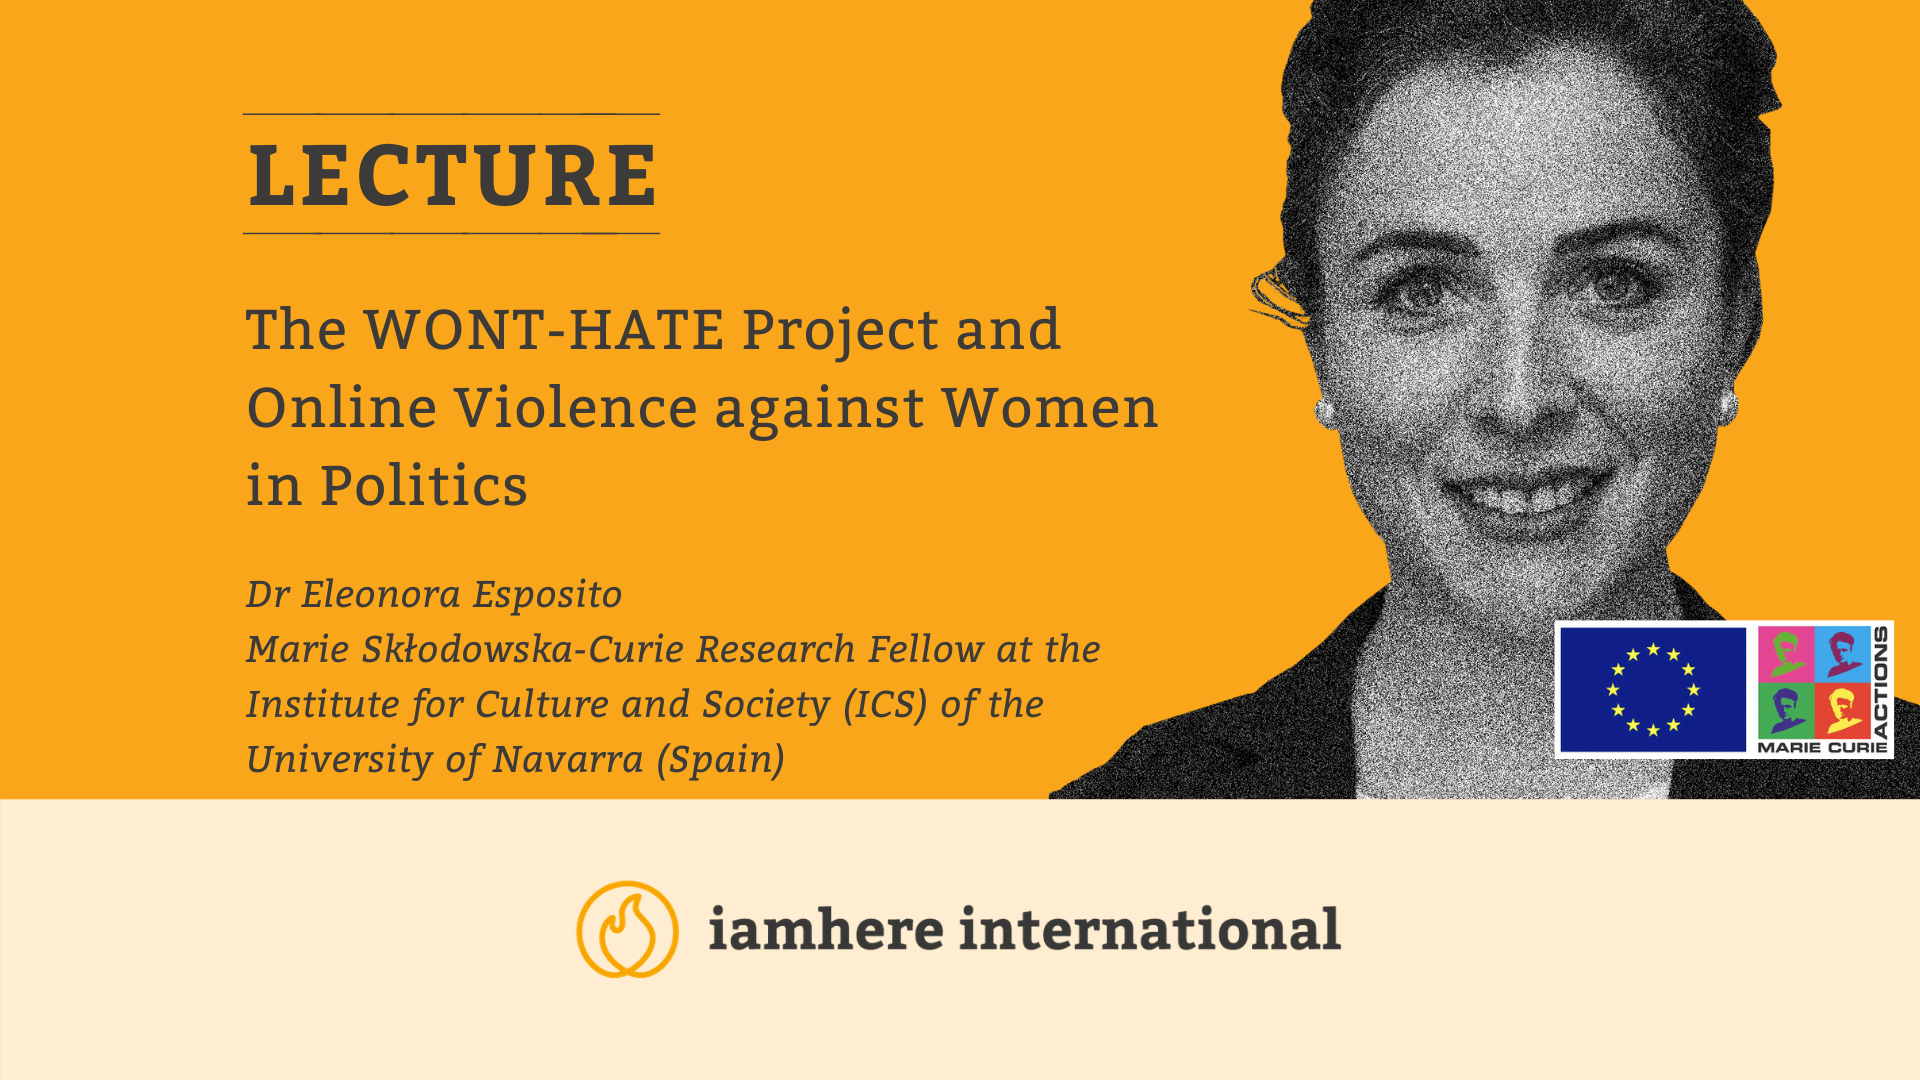 The WONT-HATE Project and Online Violence against Women in Politics